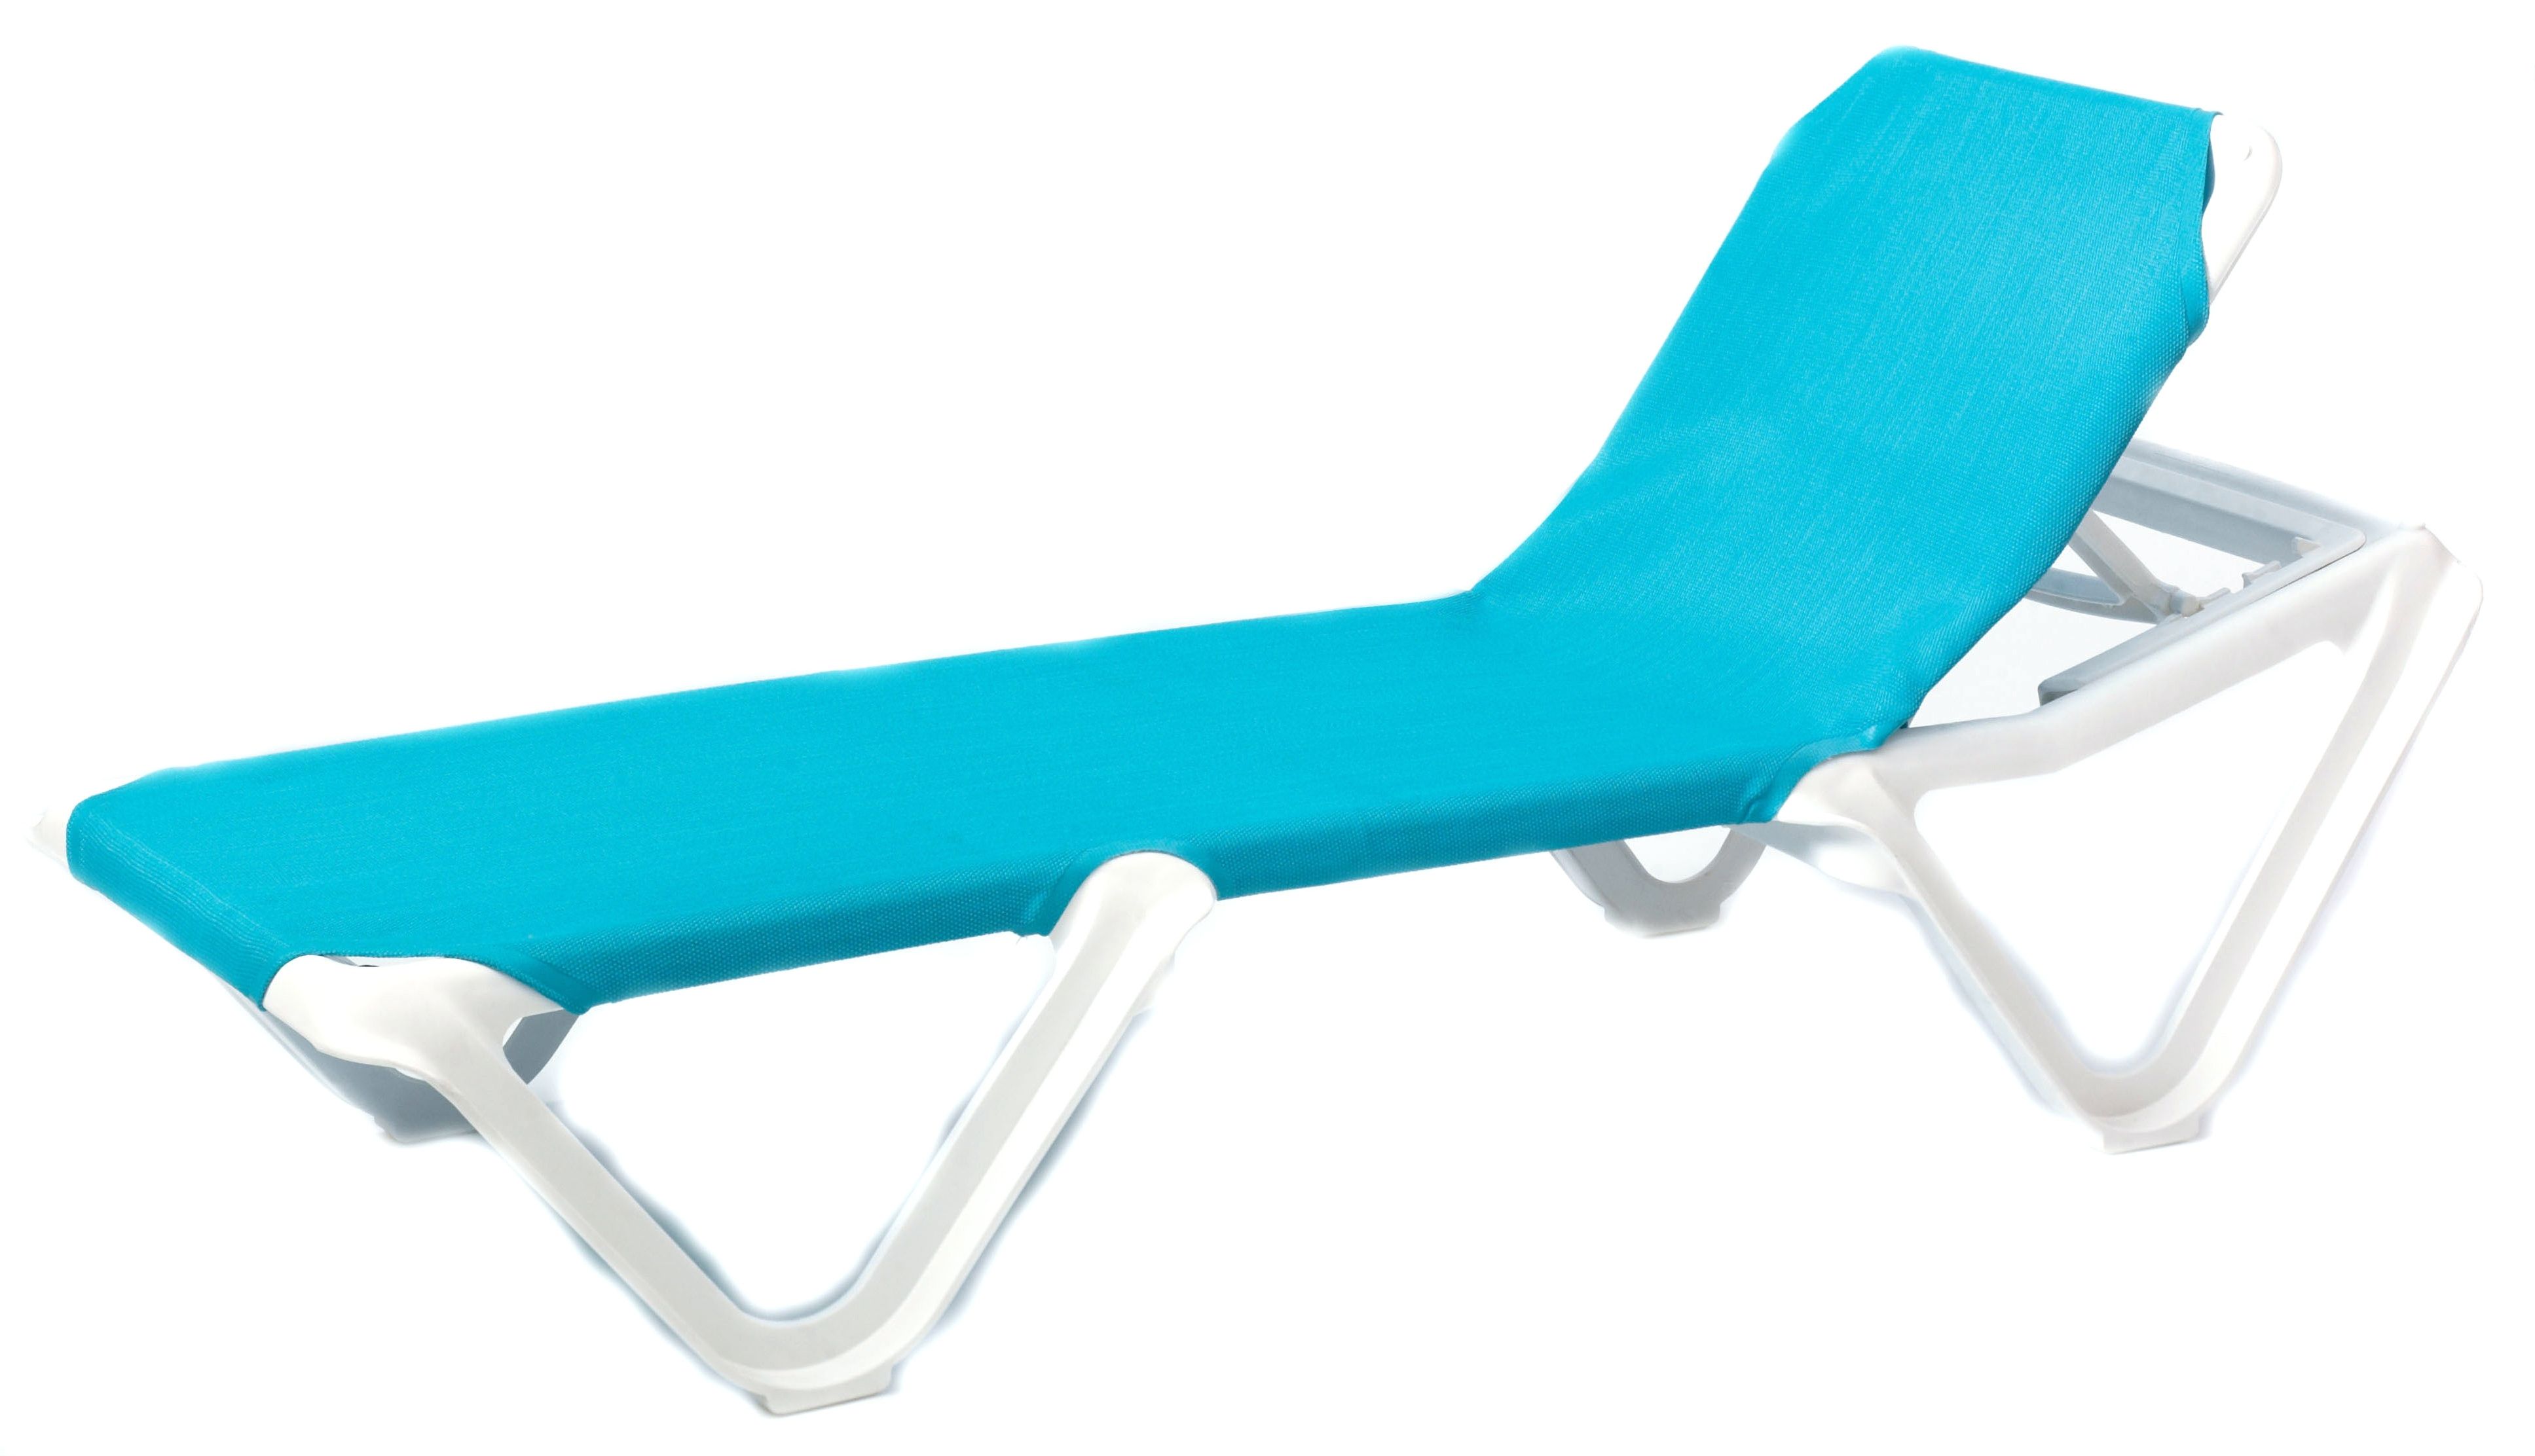 Plastic Chaise Lounge Chairs For Outdoors Within Famous Hard Plastic Chaise Lounge Chairs • Lounge Chairs Ideas (View 14 of 15)